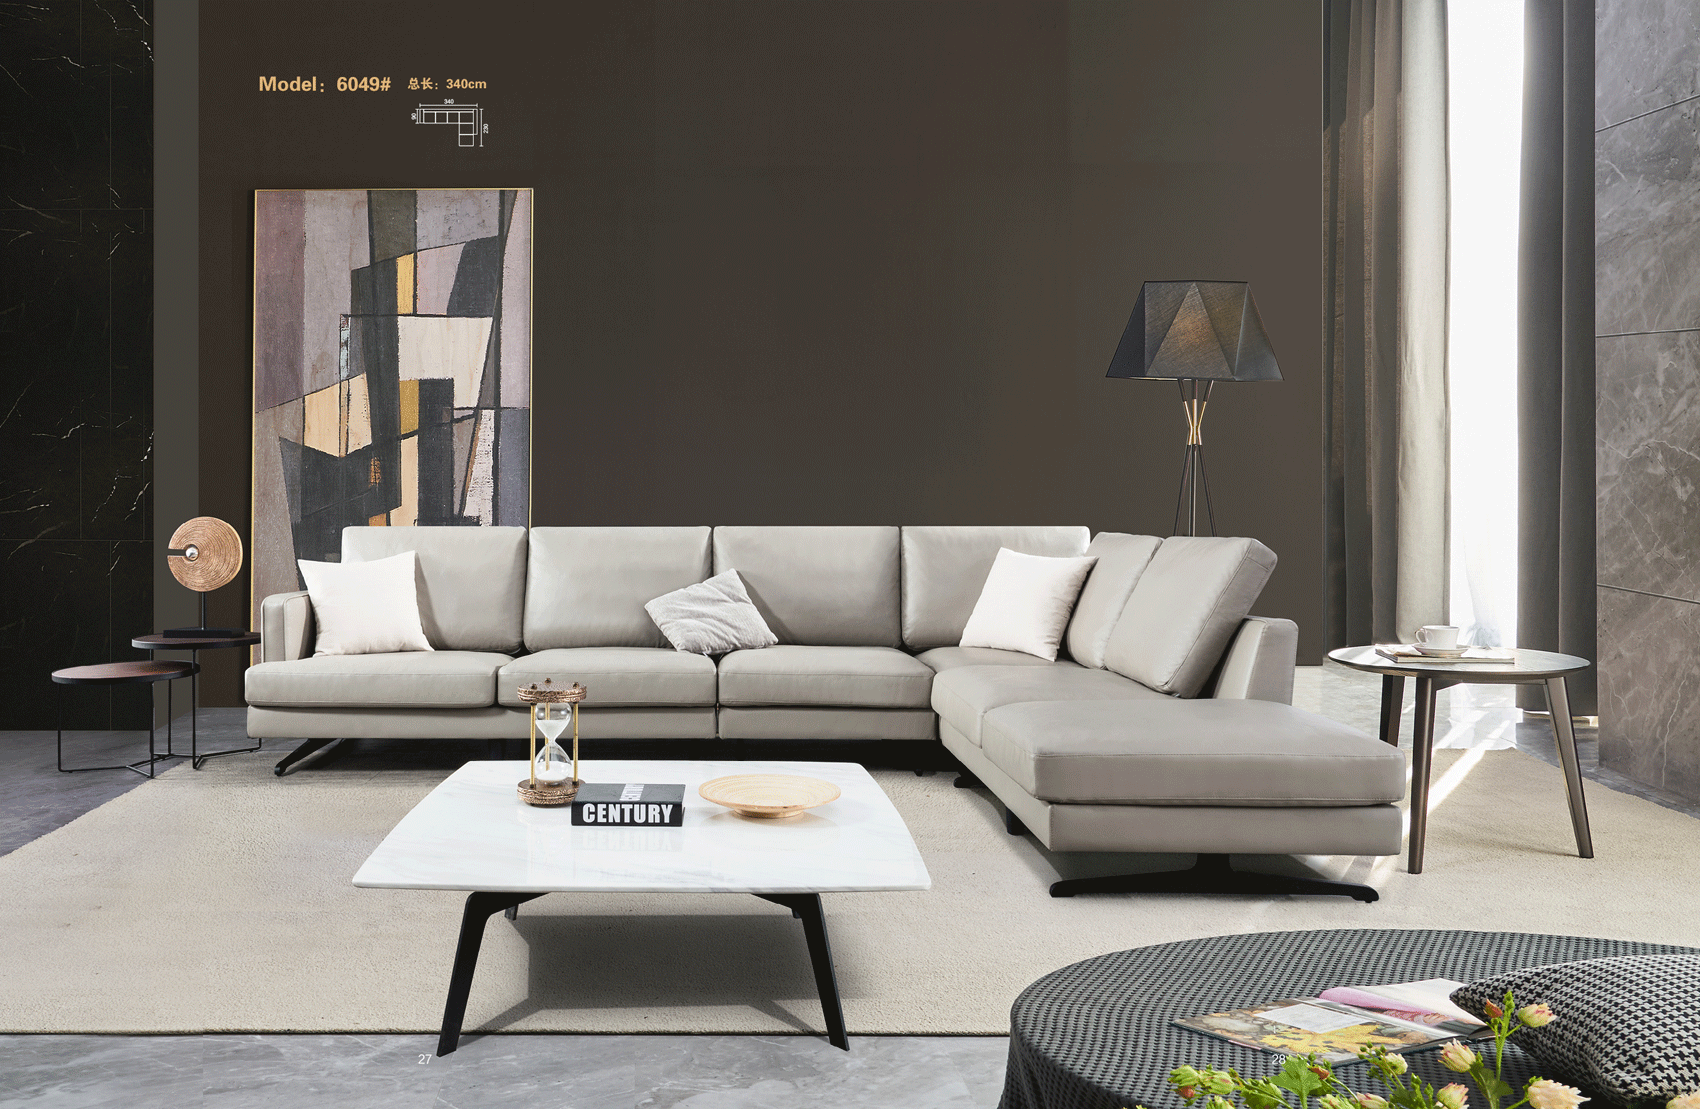 Living Room Furniture Sectionals with Sleepers 6049 Sectional